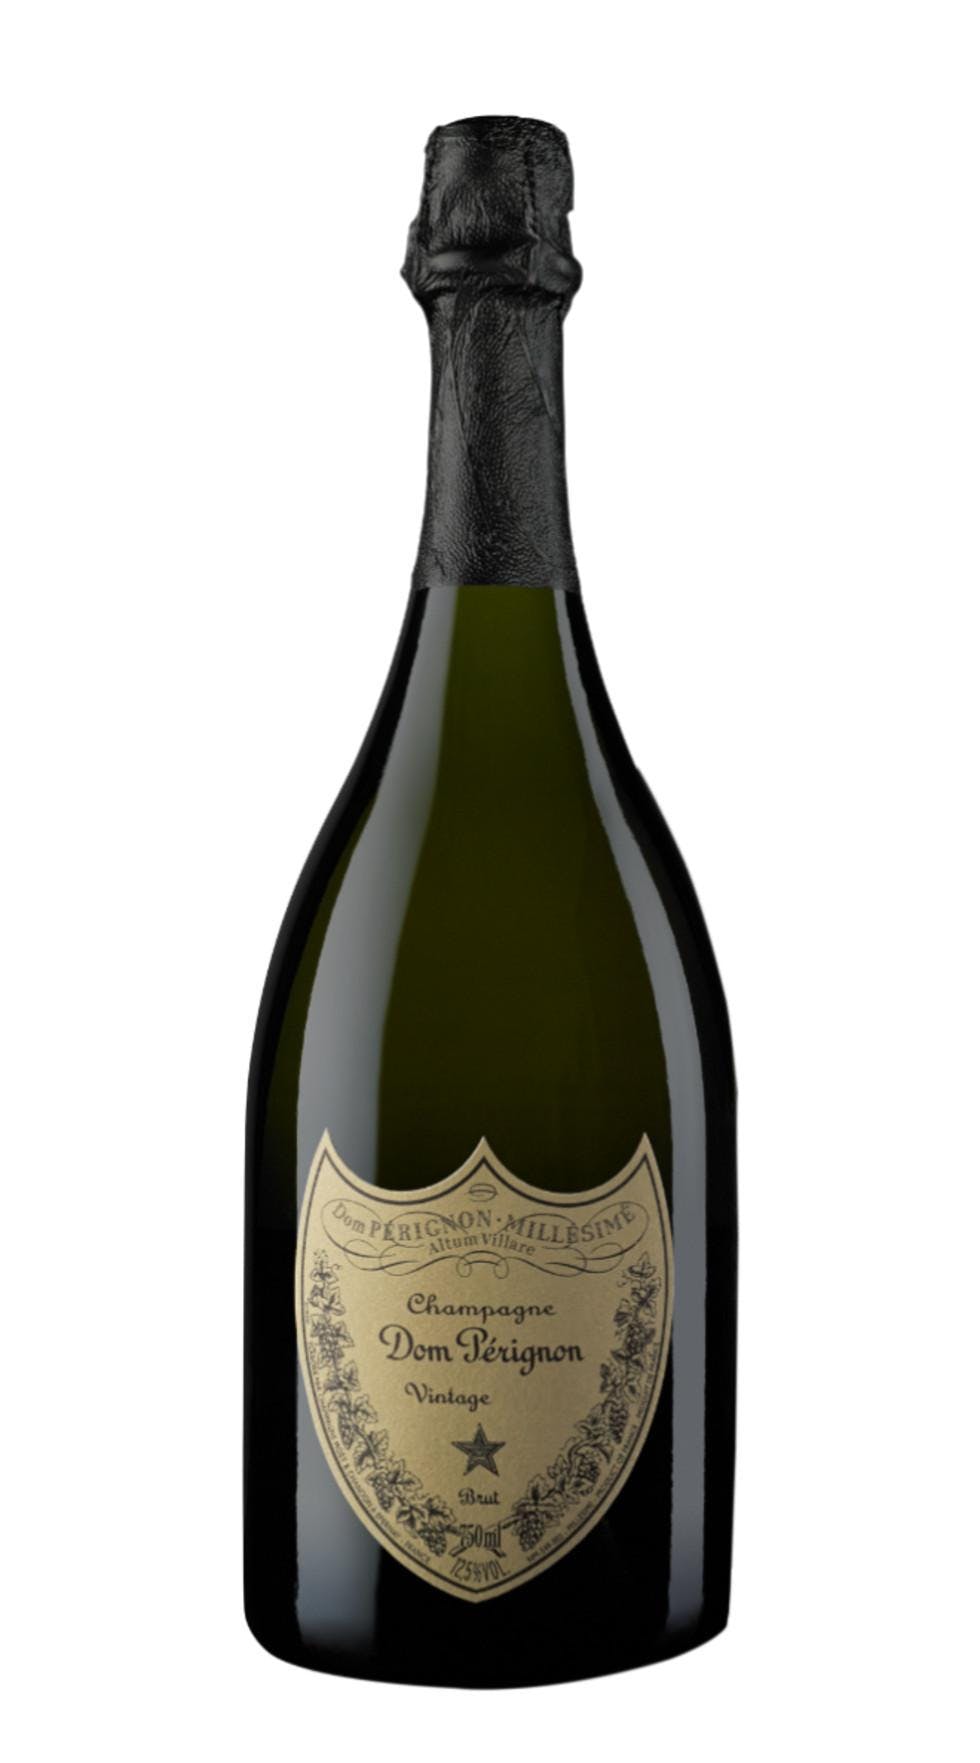 Moët & Chandon Ice Imperial 750ml - Station Plaza Wine